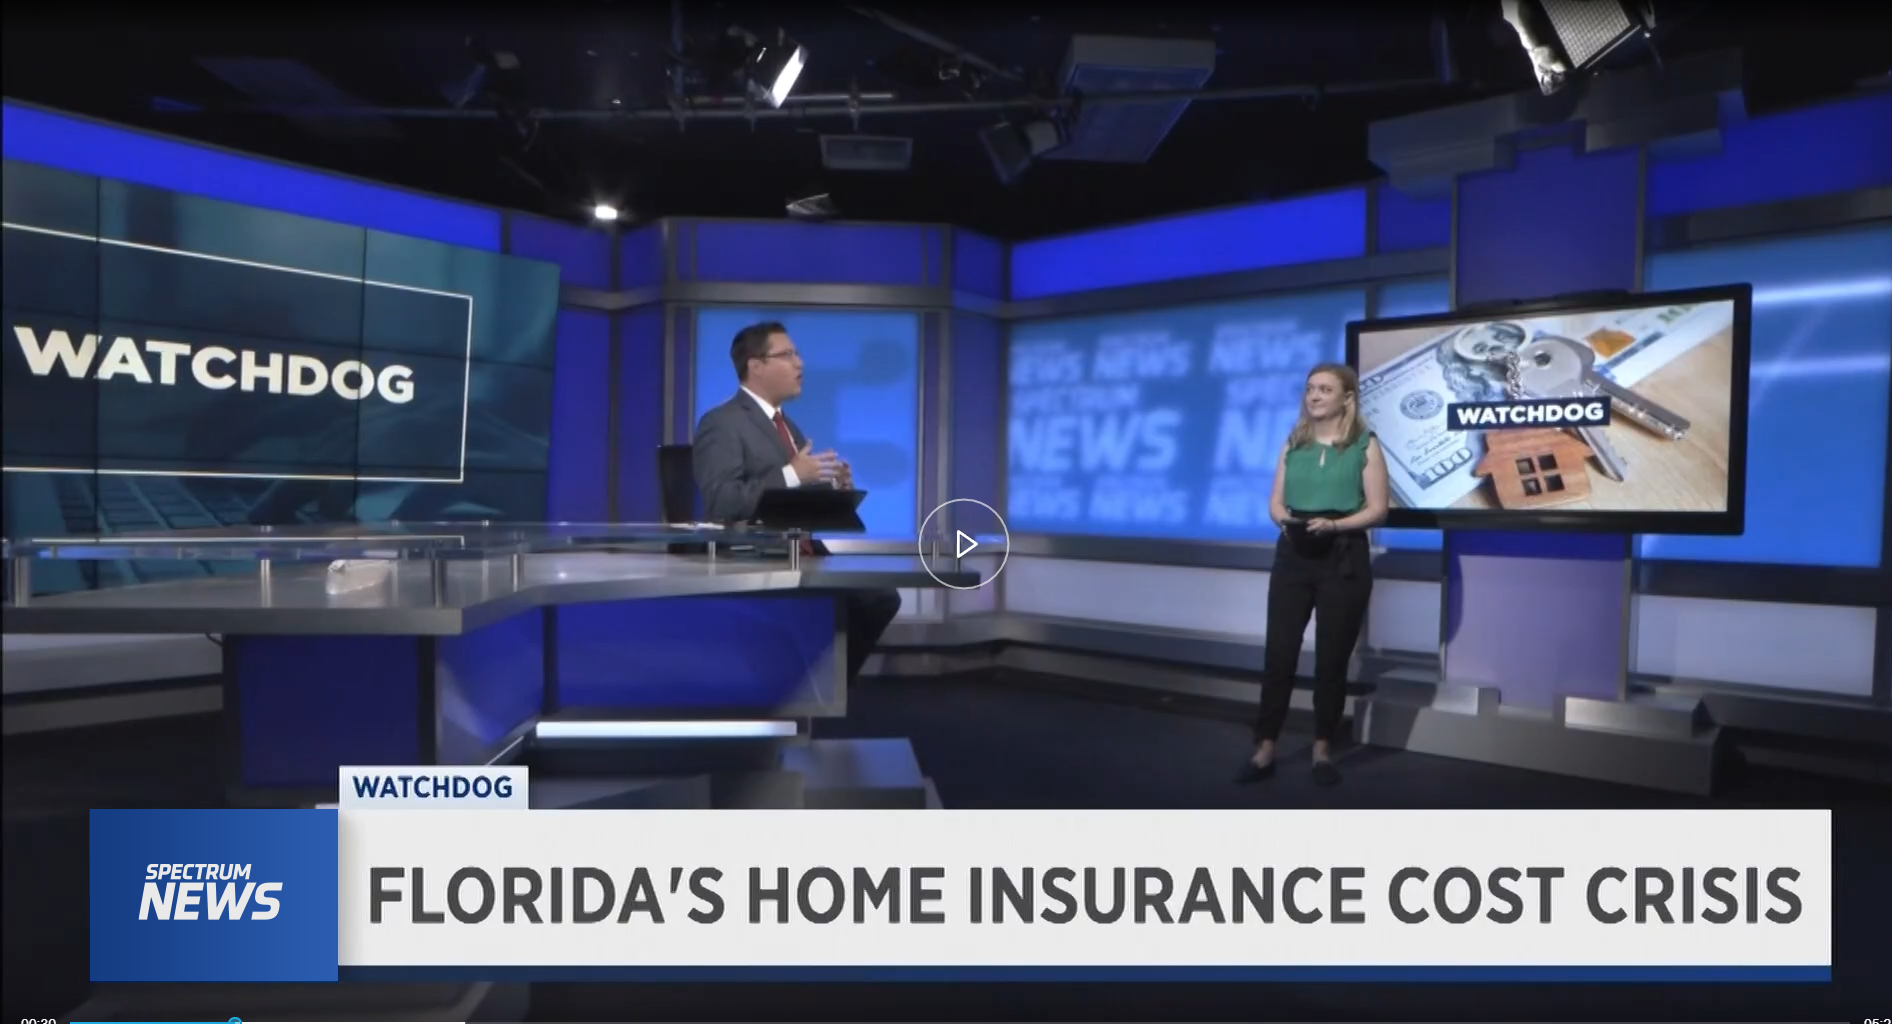 Lawsuits, spiking premiums create 'a circular problem' for Florida's home insurance market